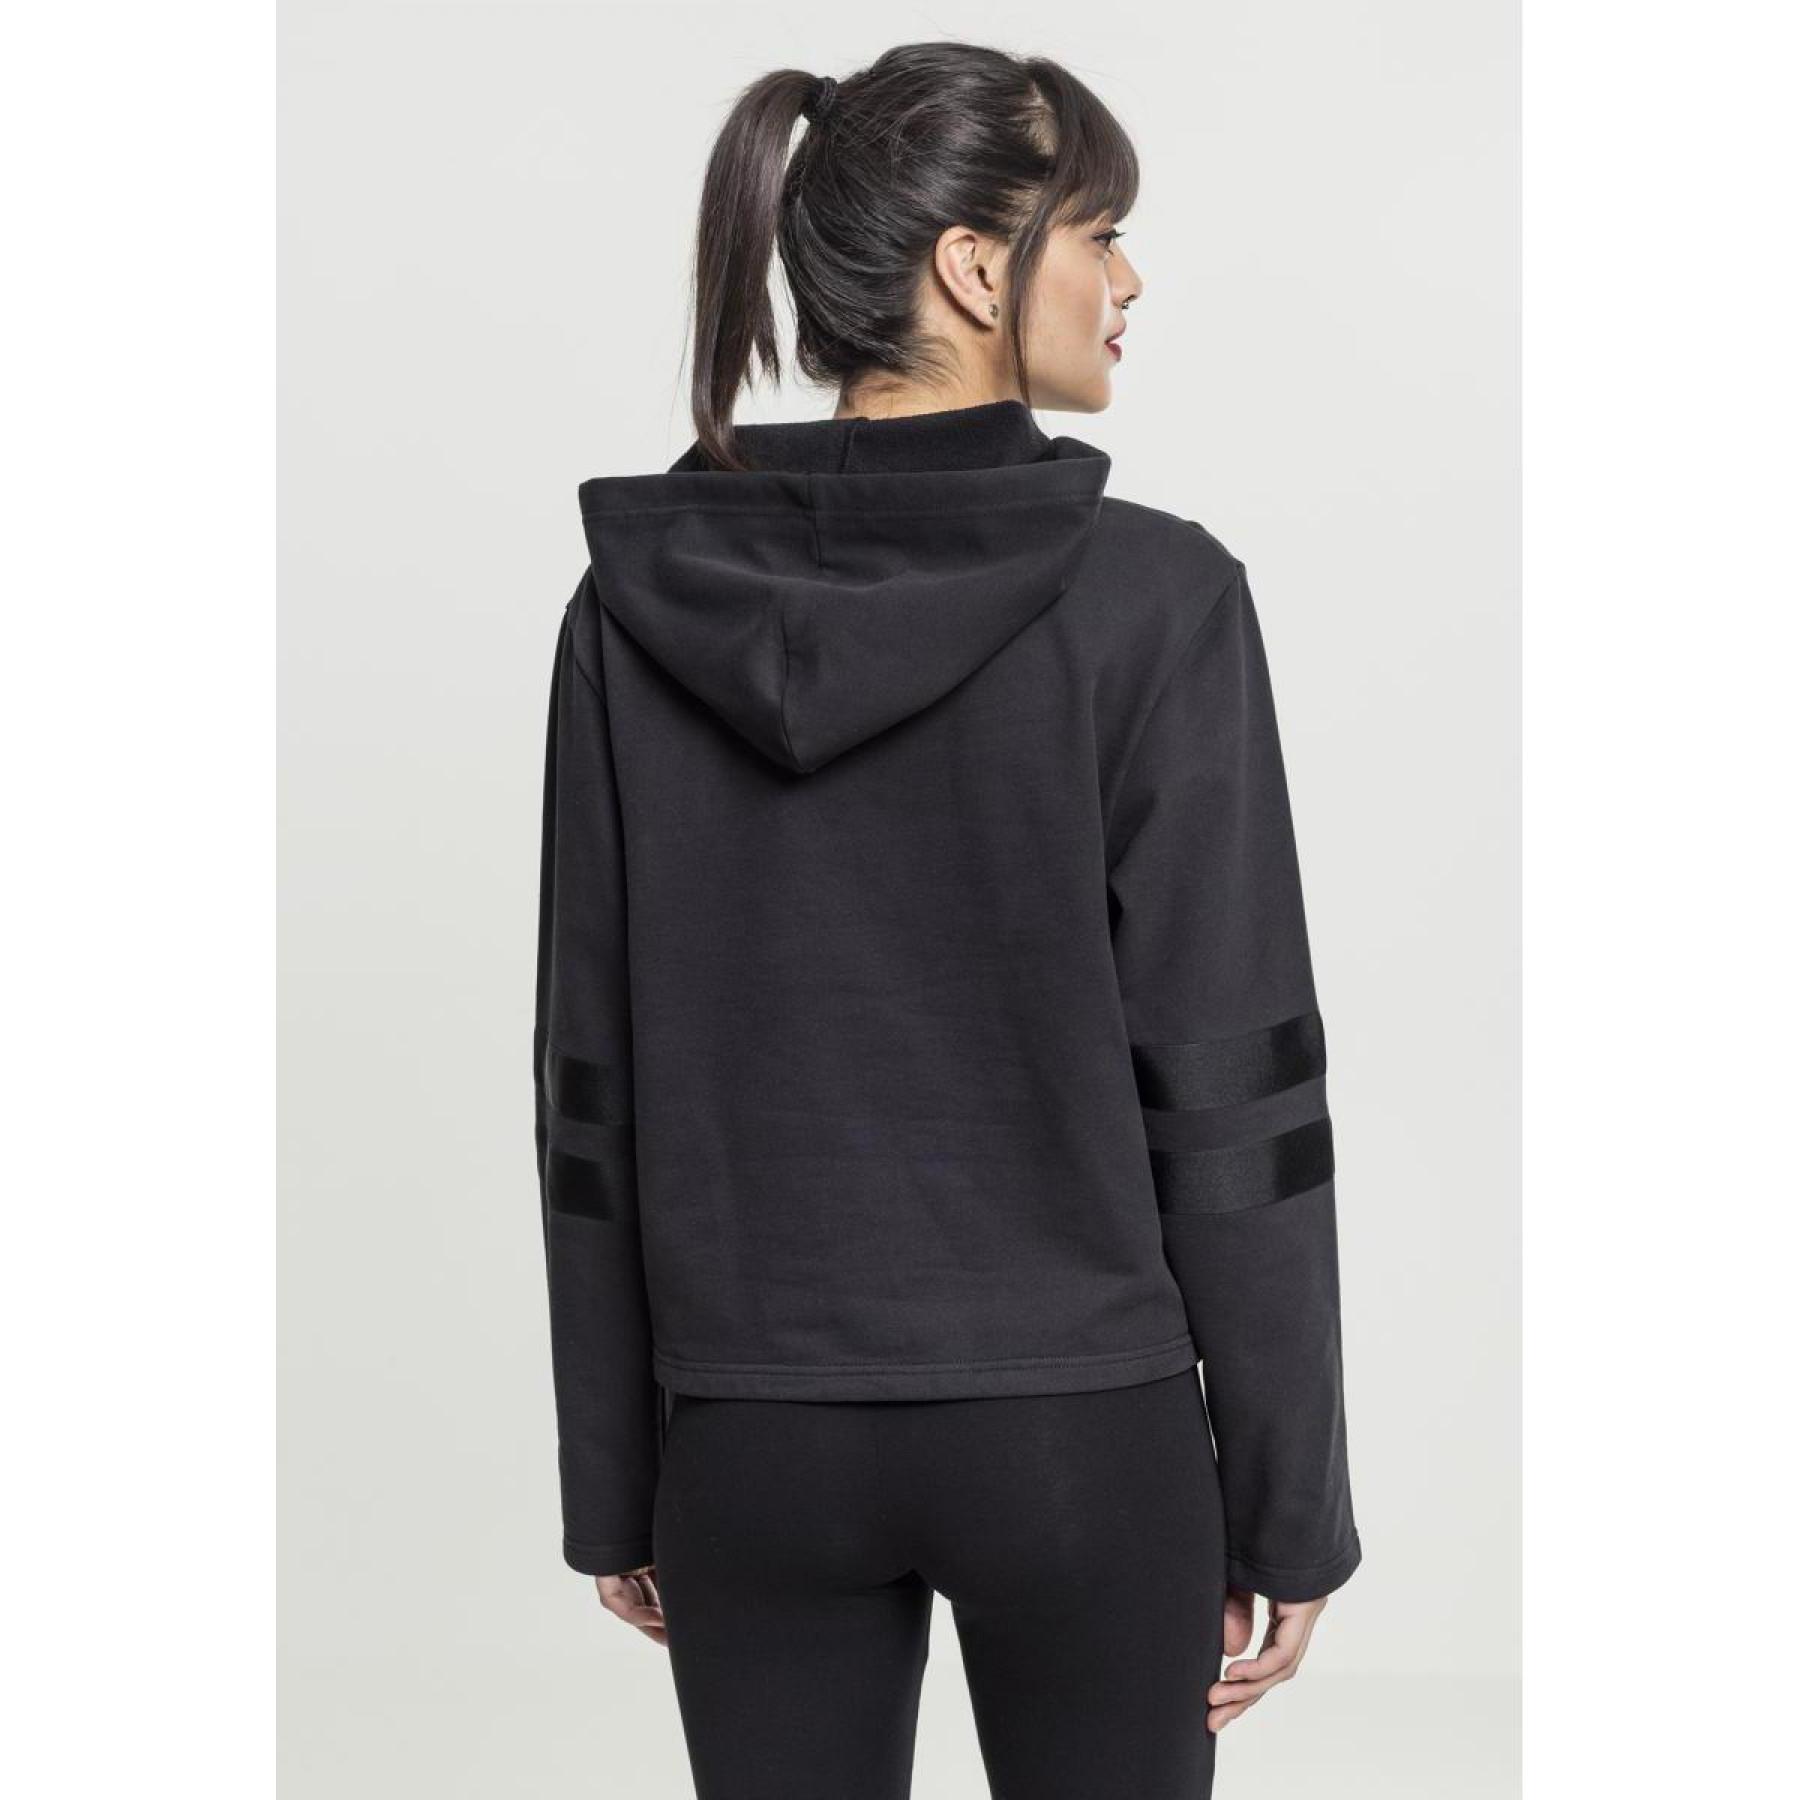 Sudadera con capucha para mujer urban Classic pead terry troyer